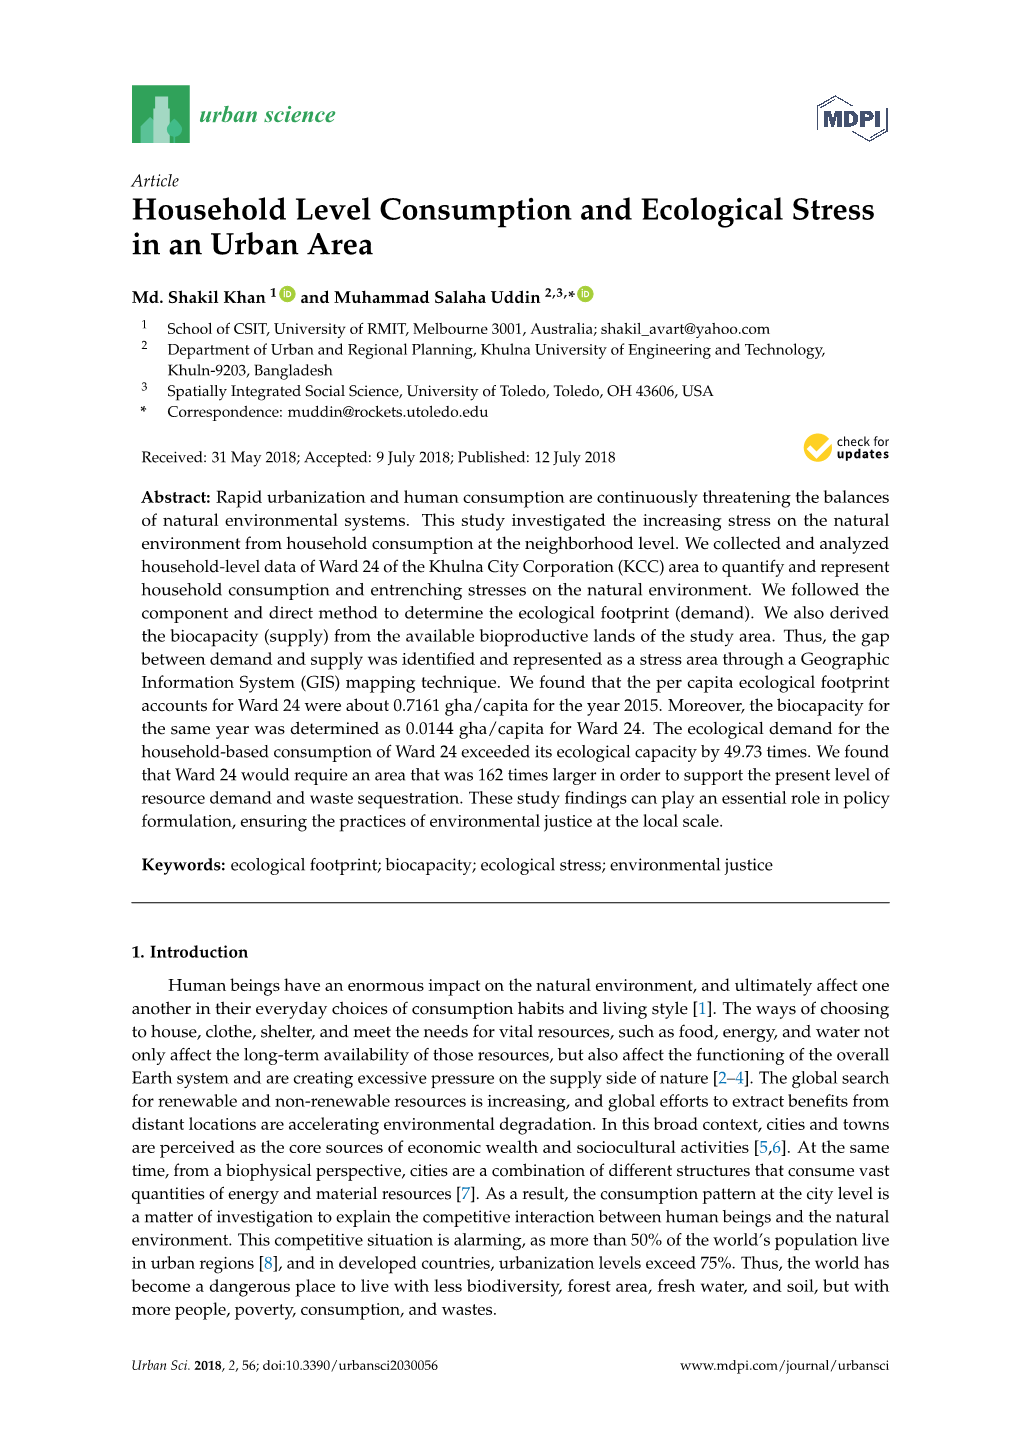 Household Level Consumption and Ecological Stress in an Urban Area